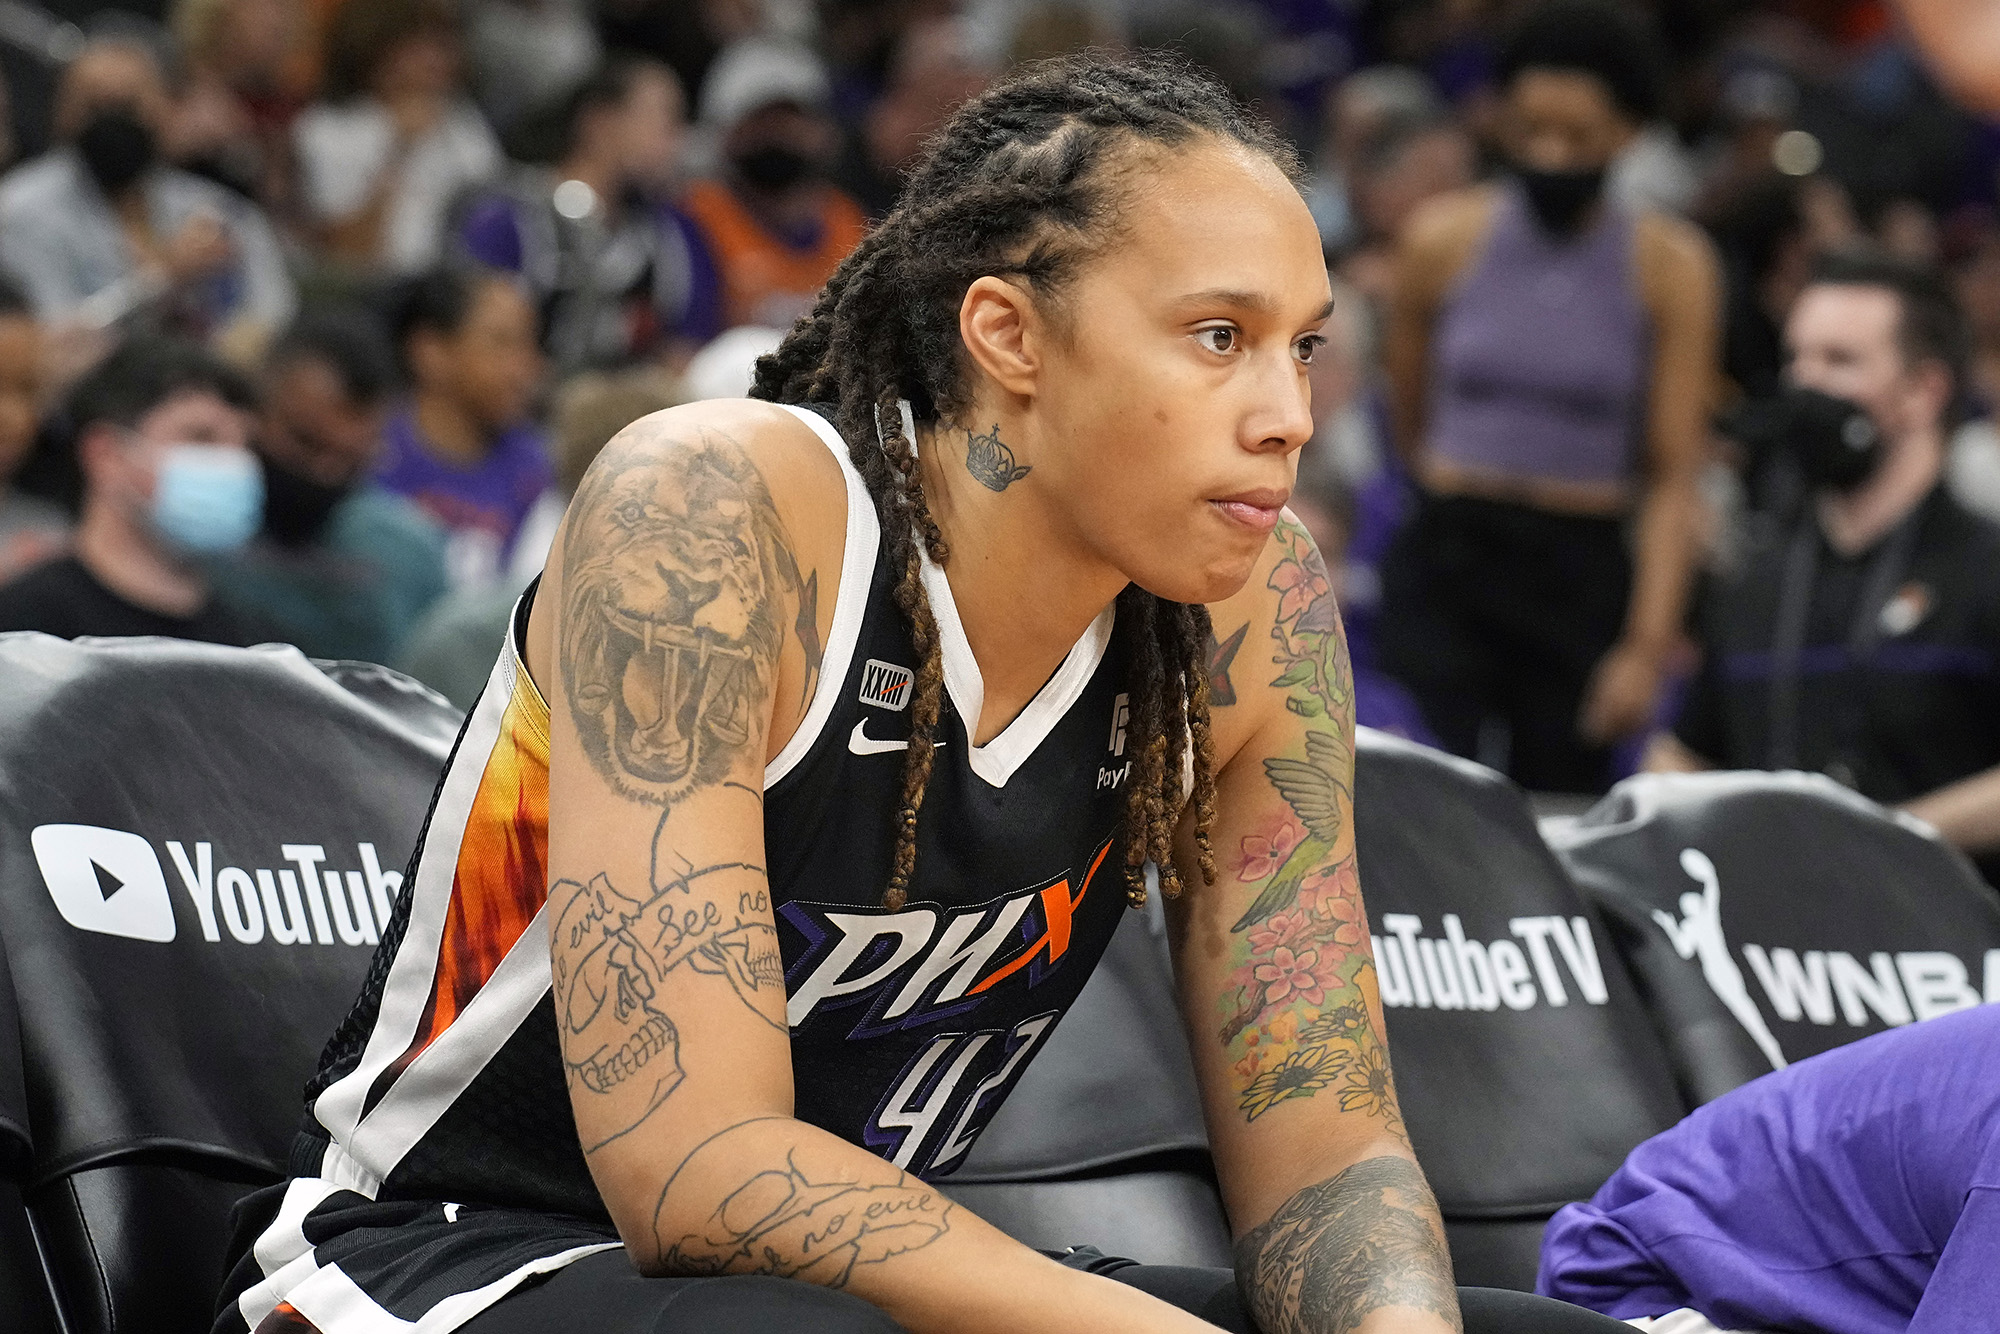 Phoenix Mercury center Brittney Griner sits during the first half of Game 2 of basketball's WNBA Finals against the Chicago Sky, on October 13, in Phoenix, Arizona.